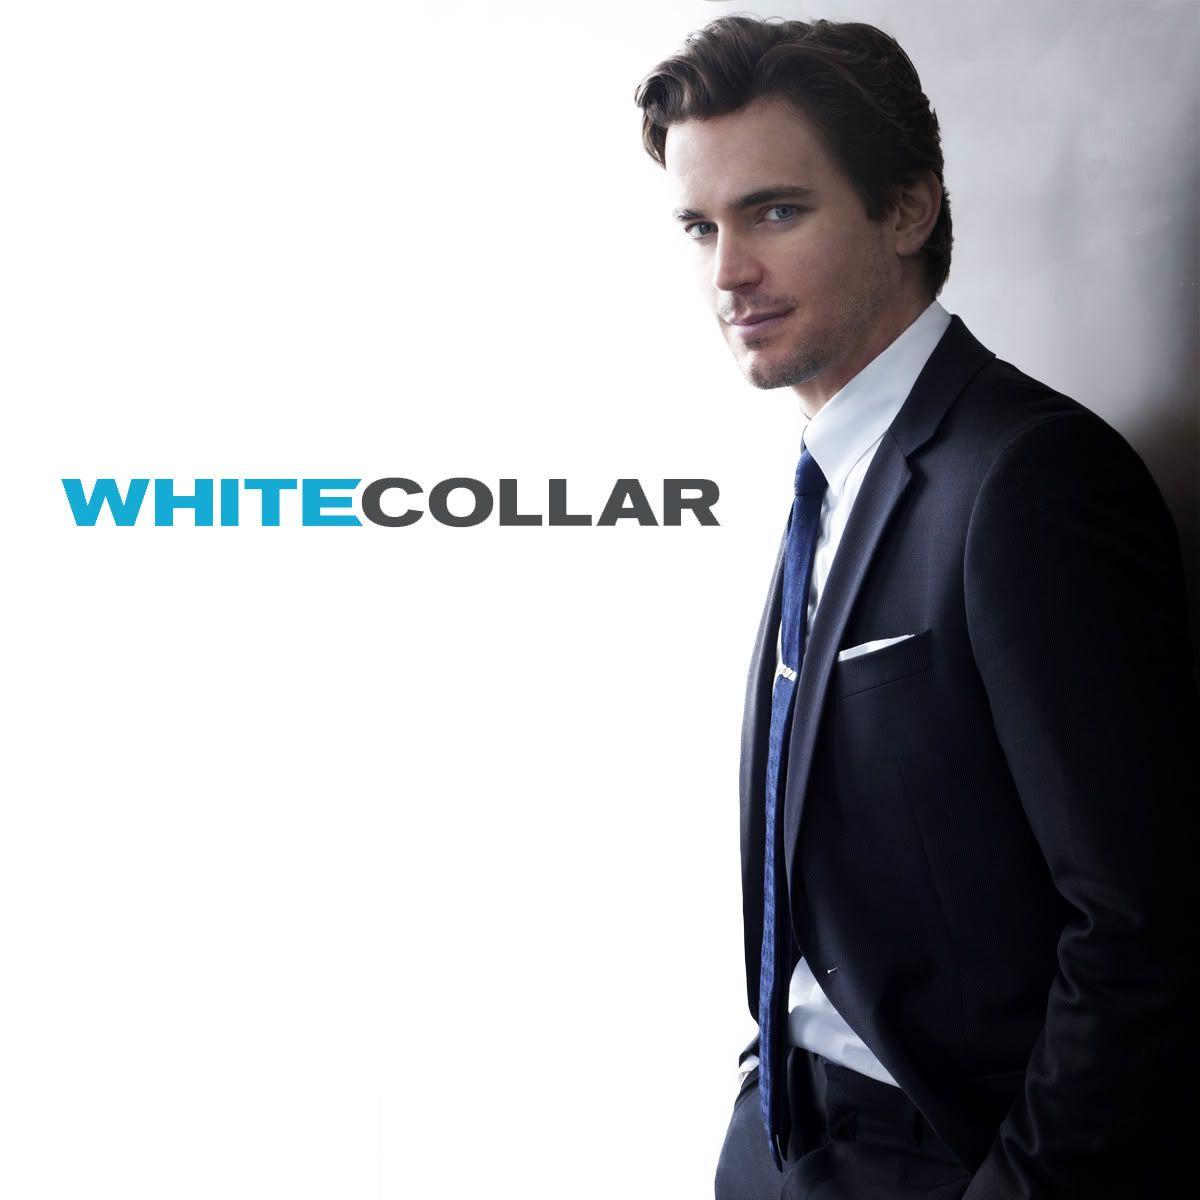 White Collar Wallpapers - Top Free White Collar Backgrounds ...